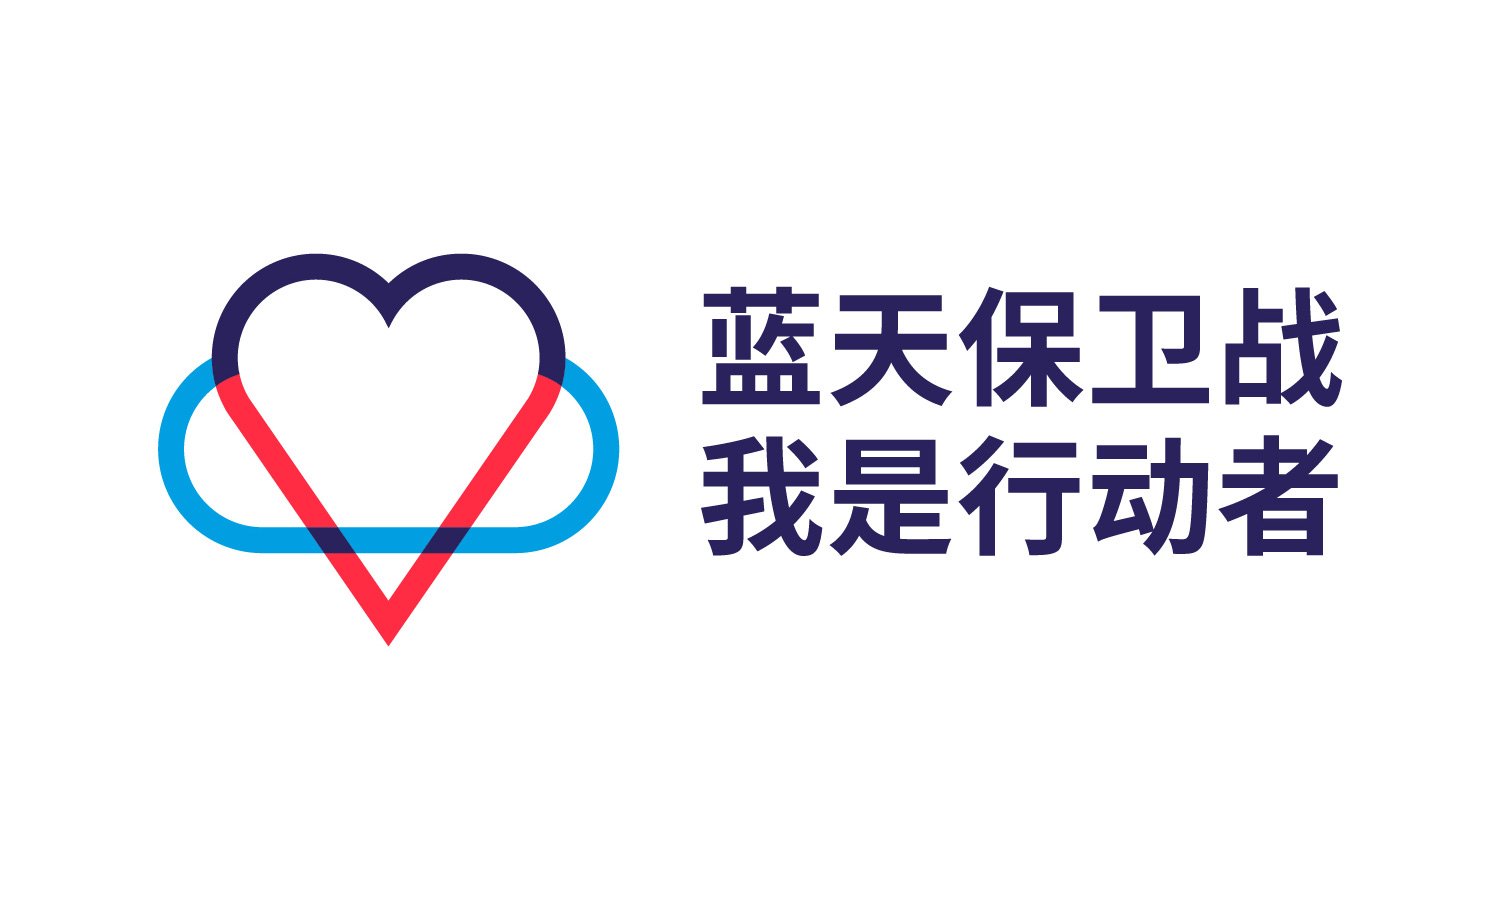 Image of World Environment Day Logo in Chinese